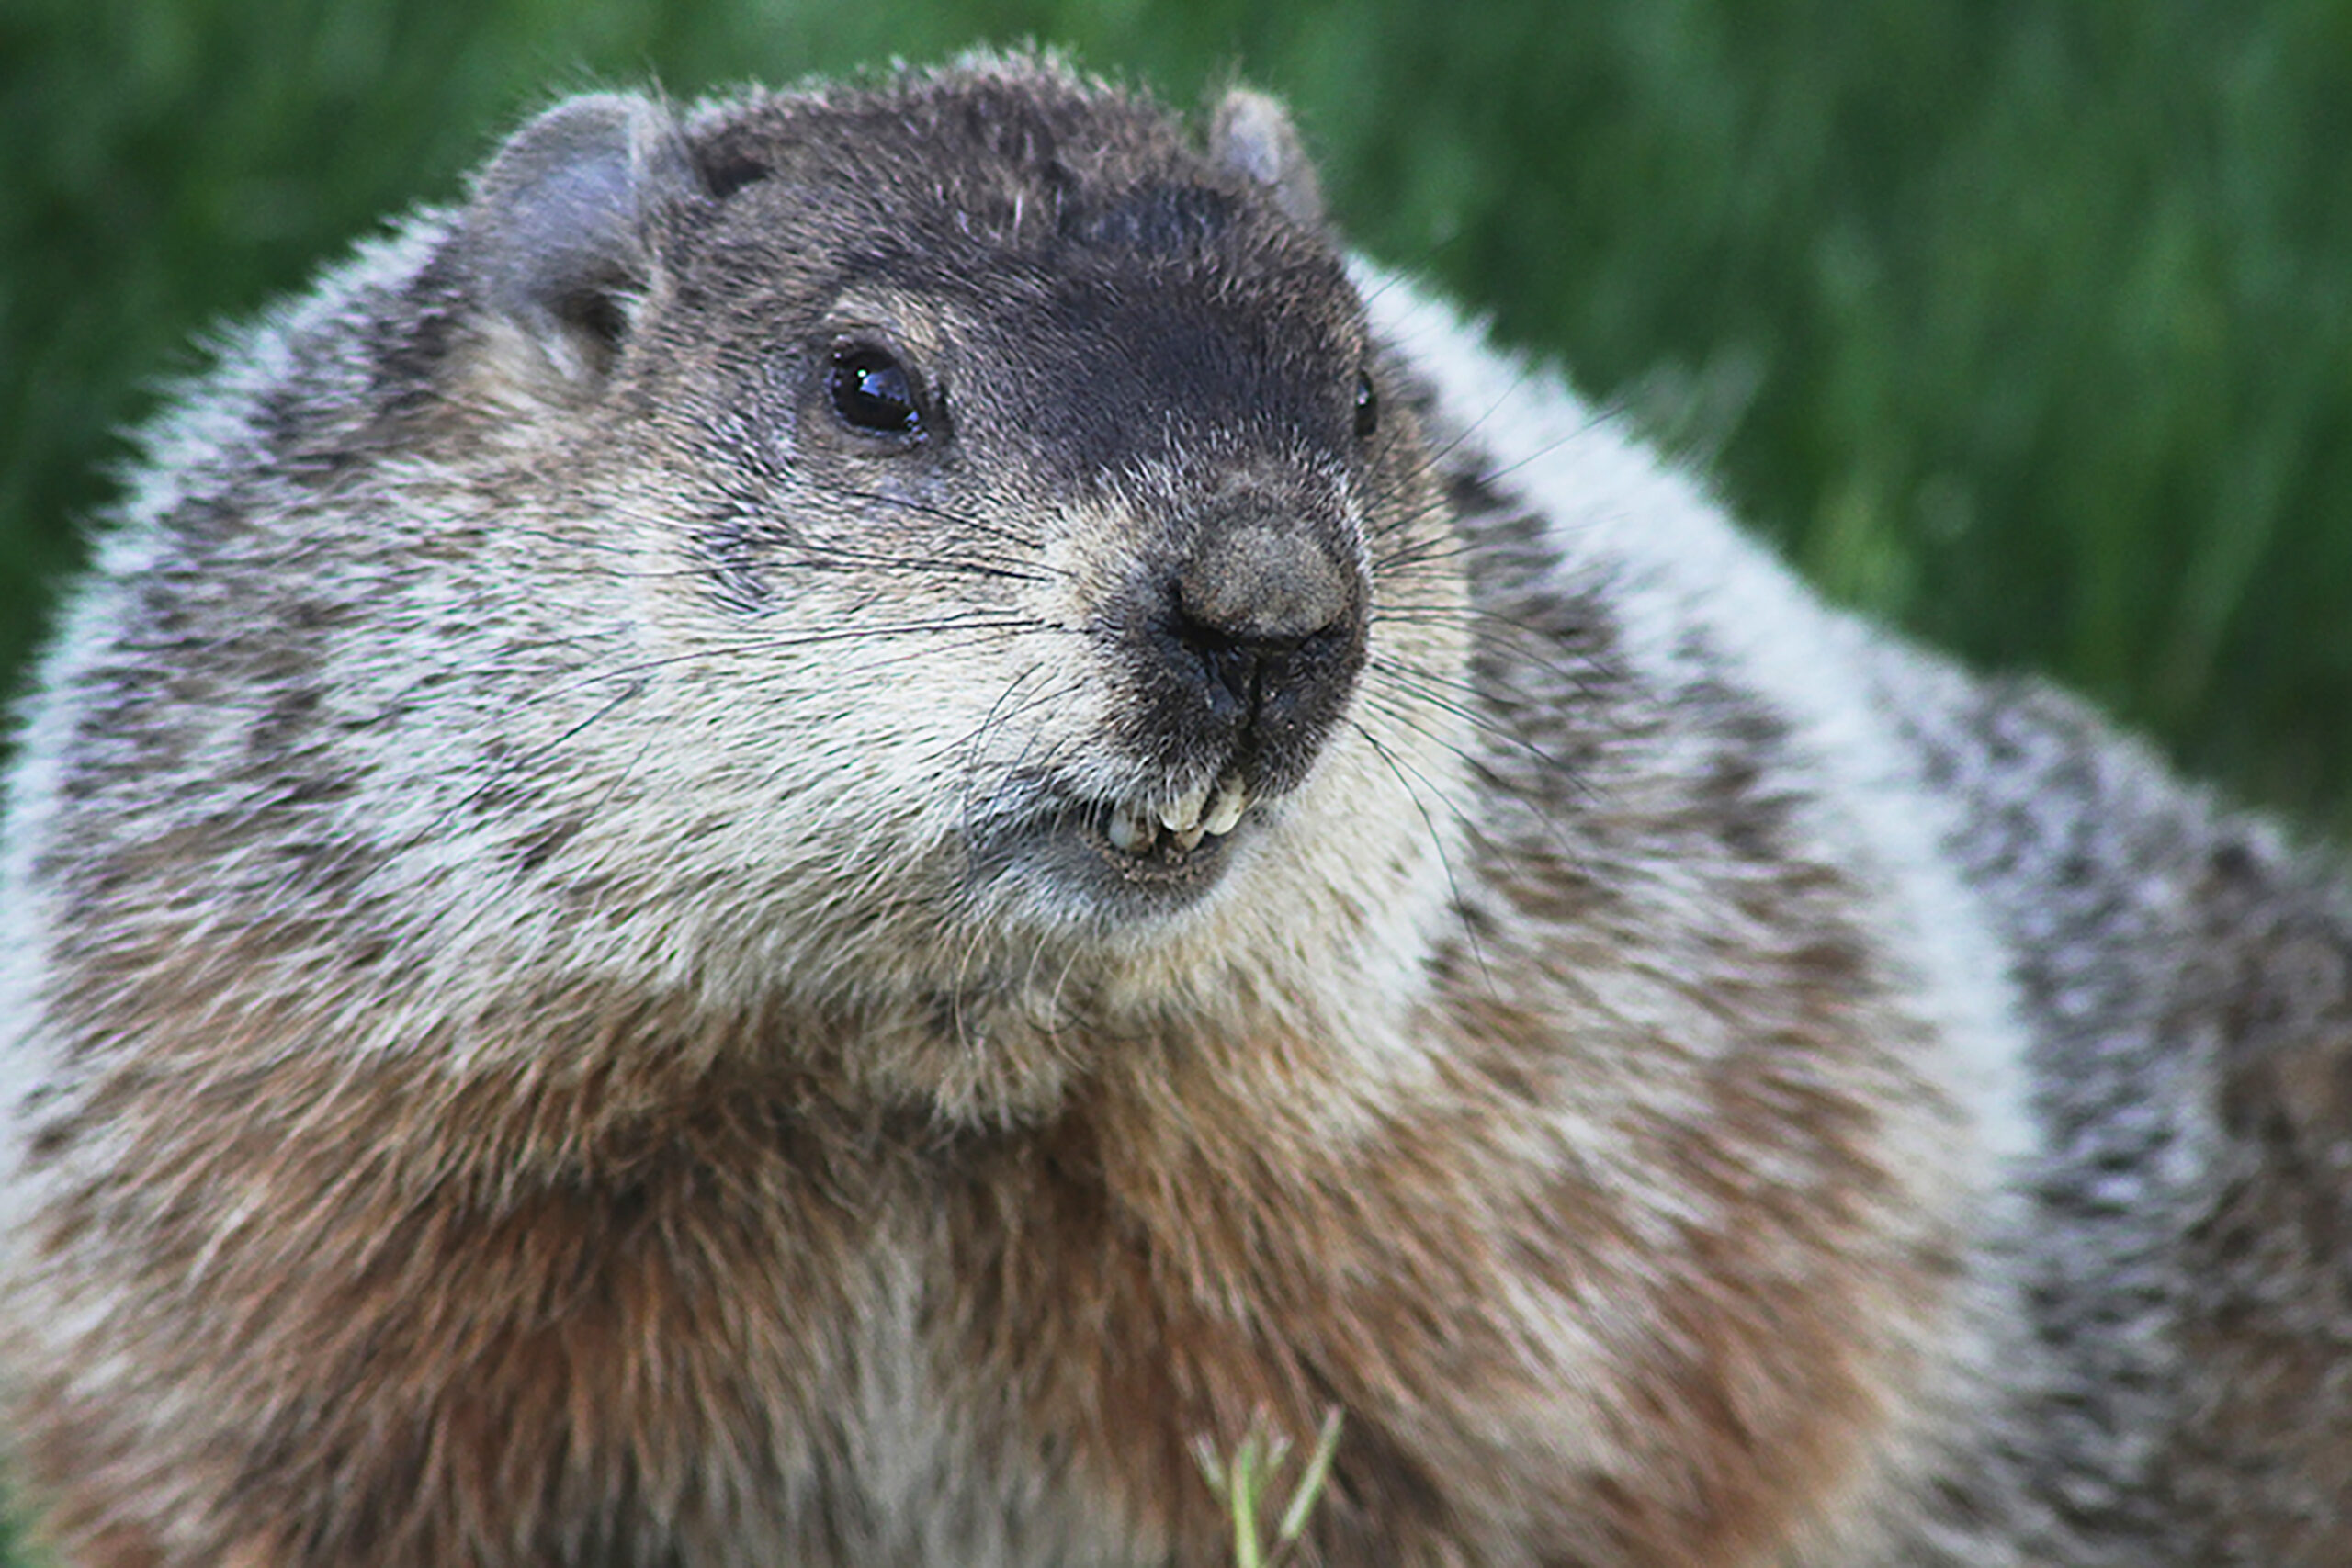 Go anywhere in the lower 48 and show folks a photo of a raccoon, a fox, or a even an opossum, and chances are folks will know them as a raccoon, a fox and an opossum.  Show them a photo of a woodchuck and the name varies.   DELL CULLUM